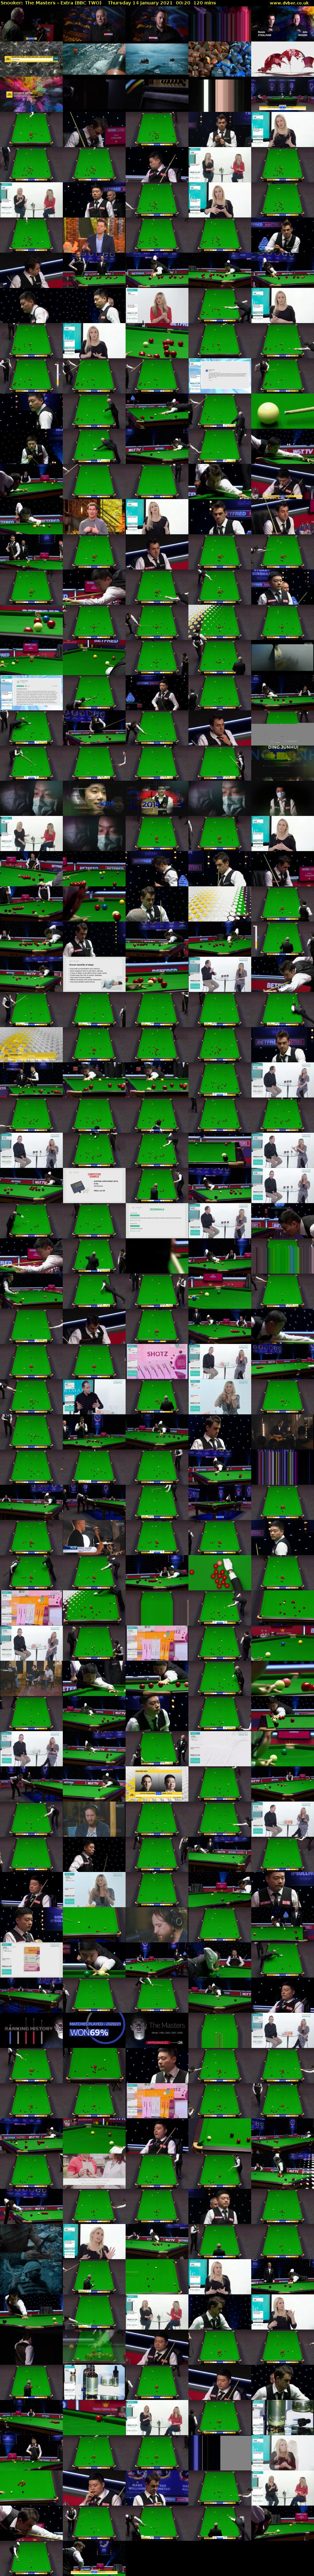 Snooker: The Masters - Extra (BBC TWO) Thursday 14 January 2021 00:20 - 02:20